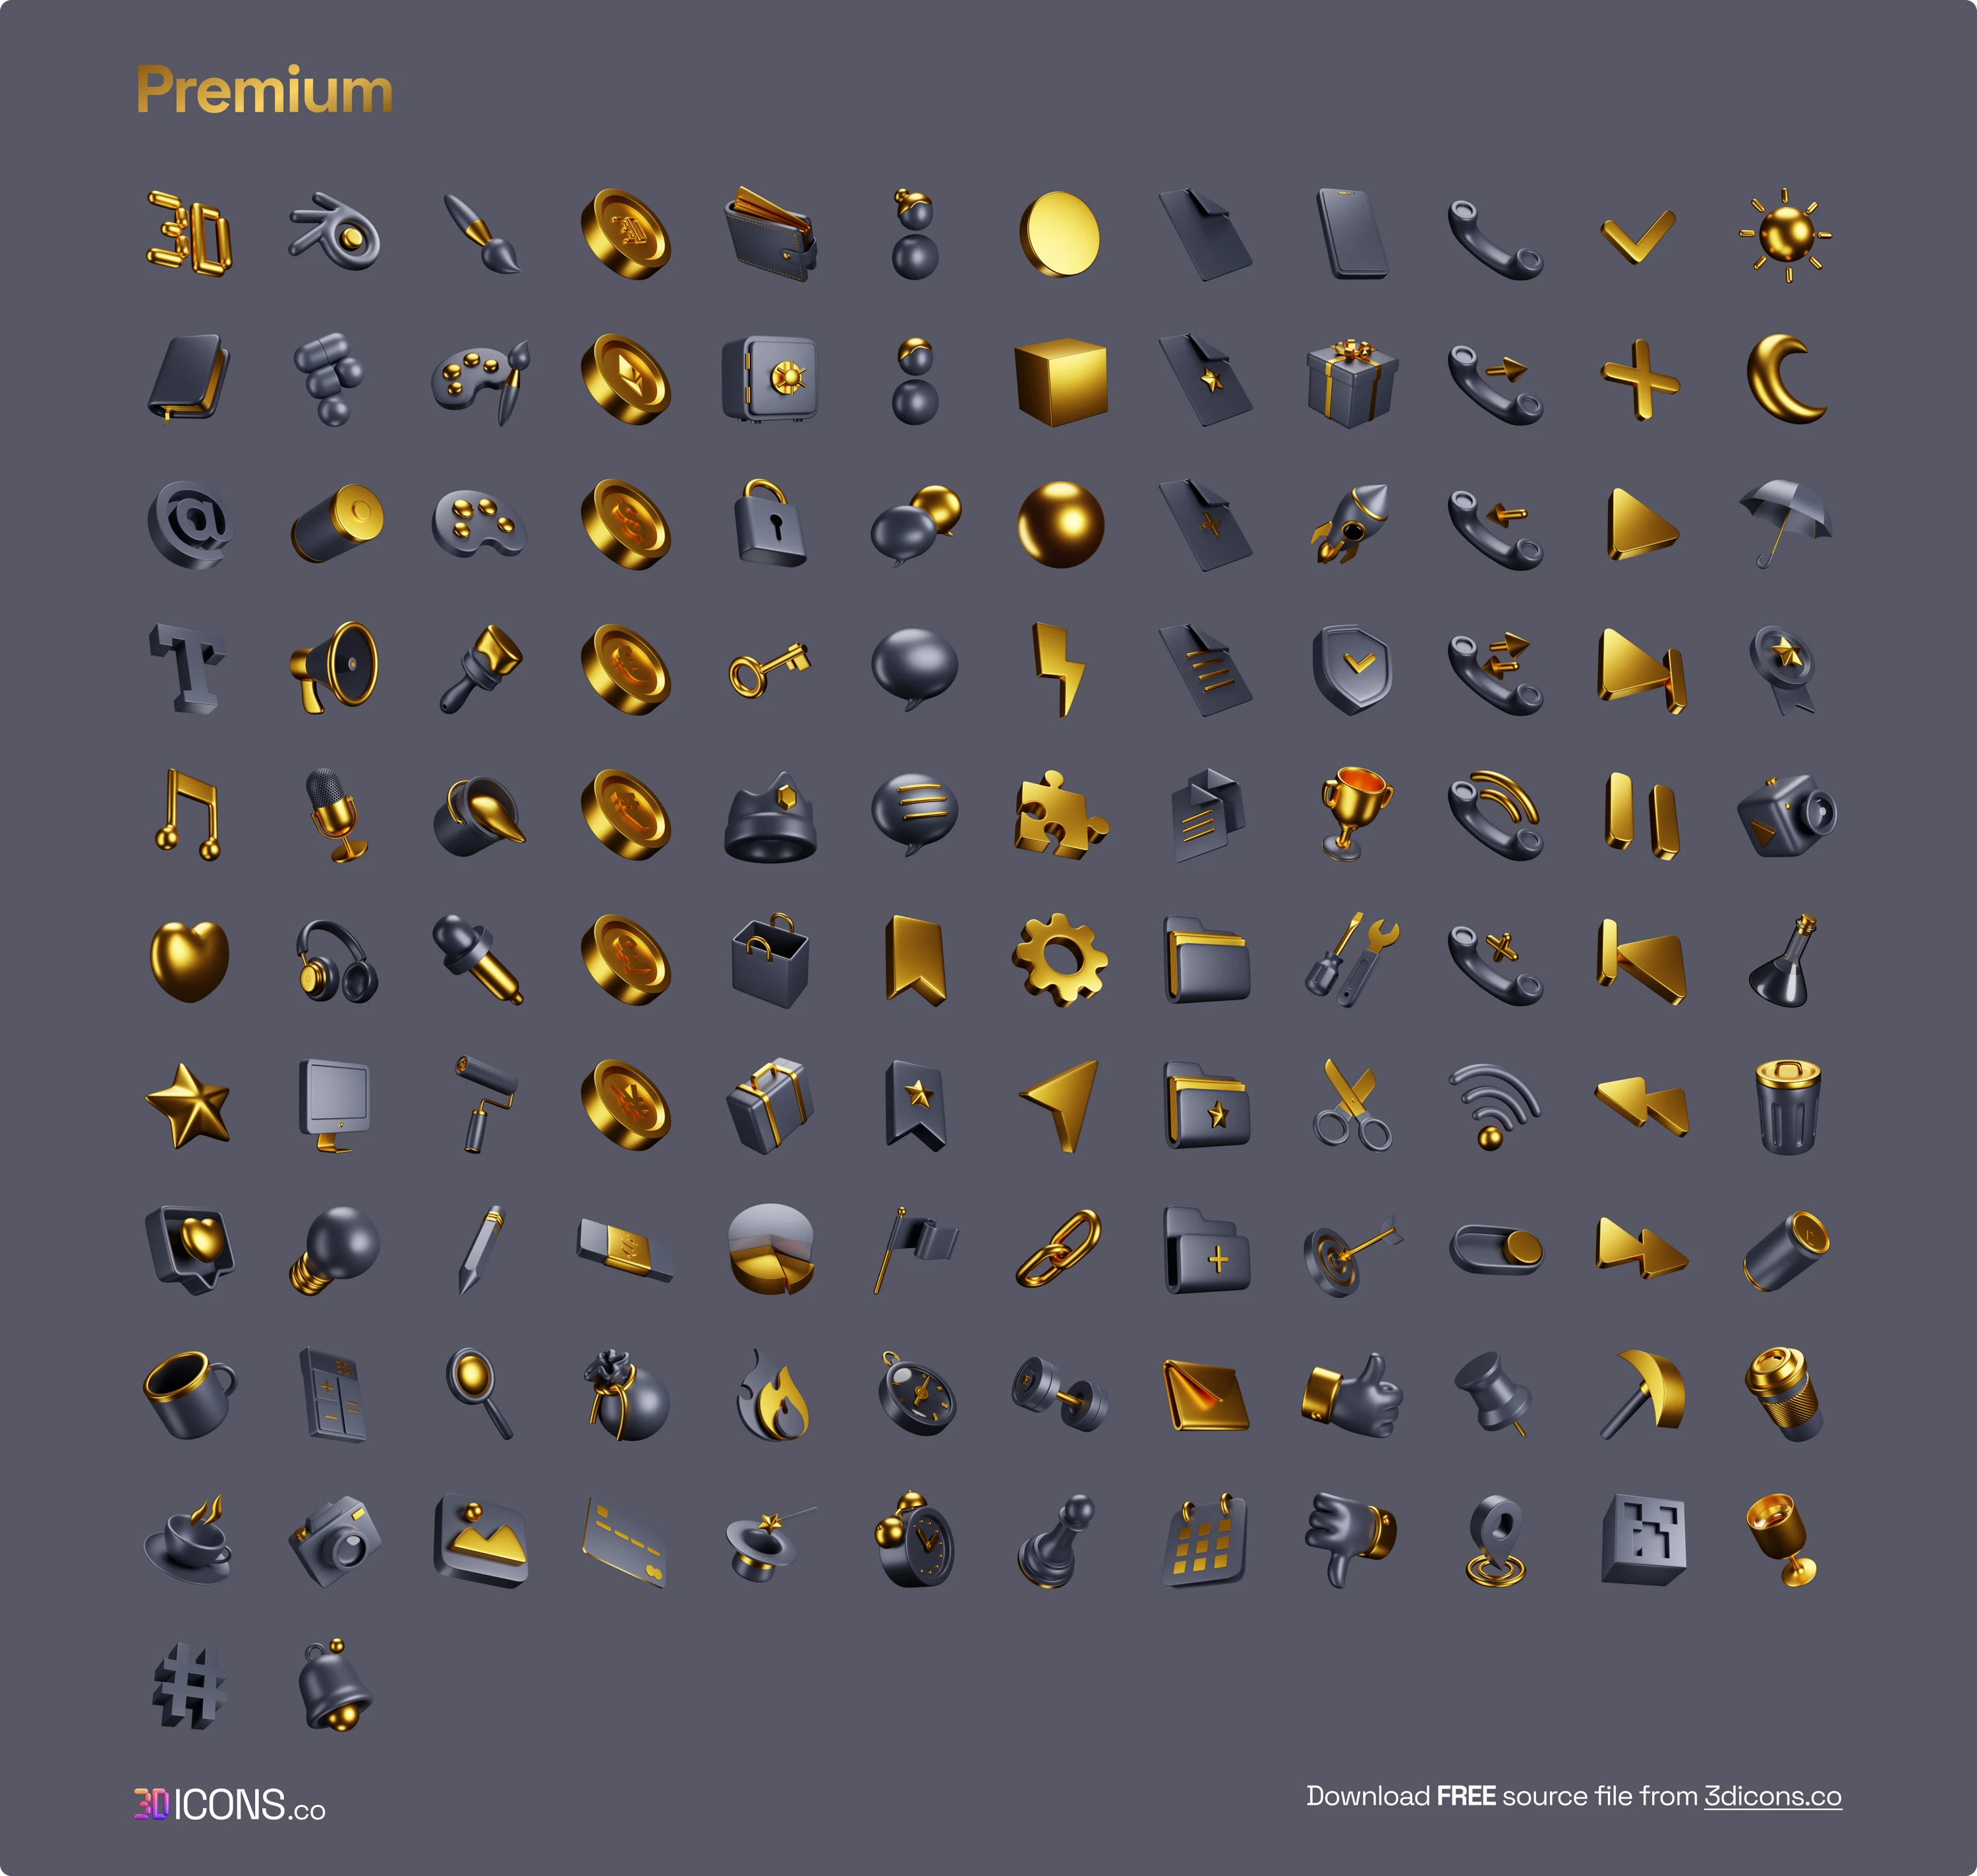 3dicons - Open Source 3D Icon Library - 1440+ beautifully crafted open-source 3D icons. You can use completely free and without attribution for personal or commercial project.